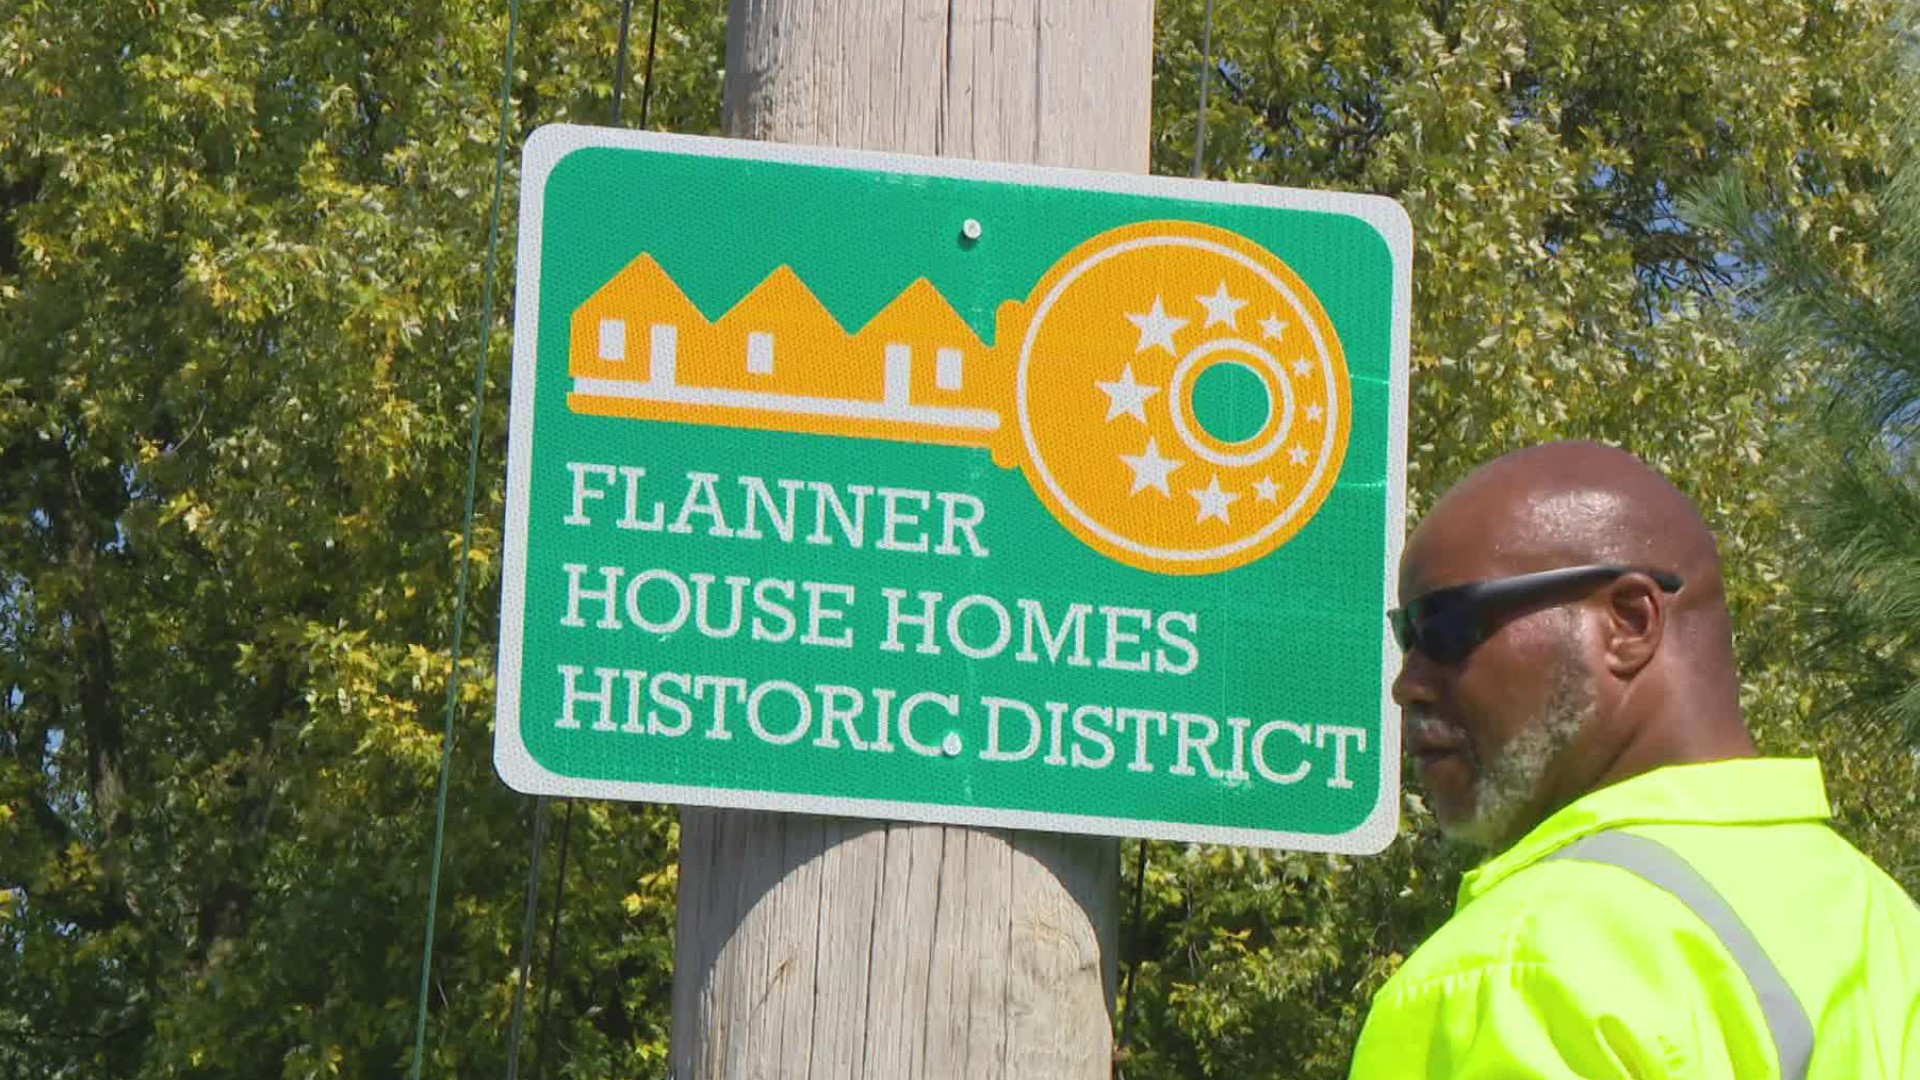 The 15 signs put up Tuesday will mark the area as part of the National Registry of Historic Districts.